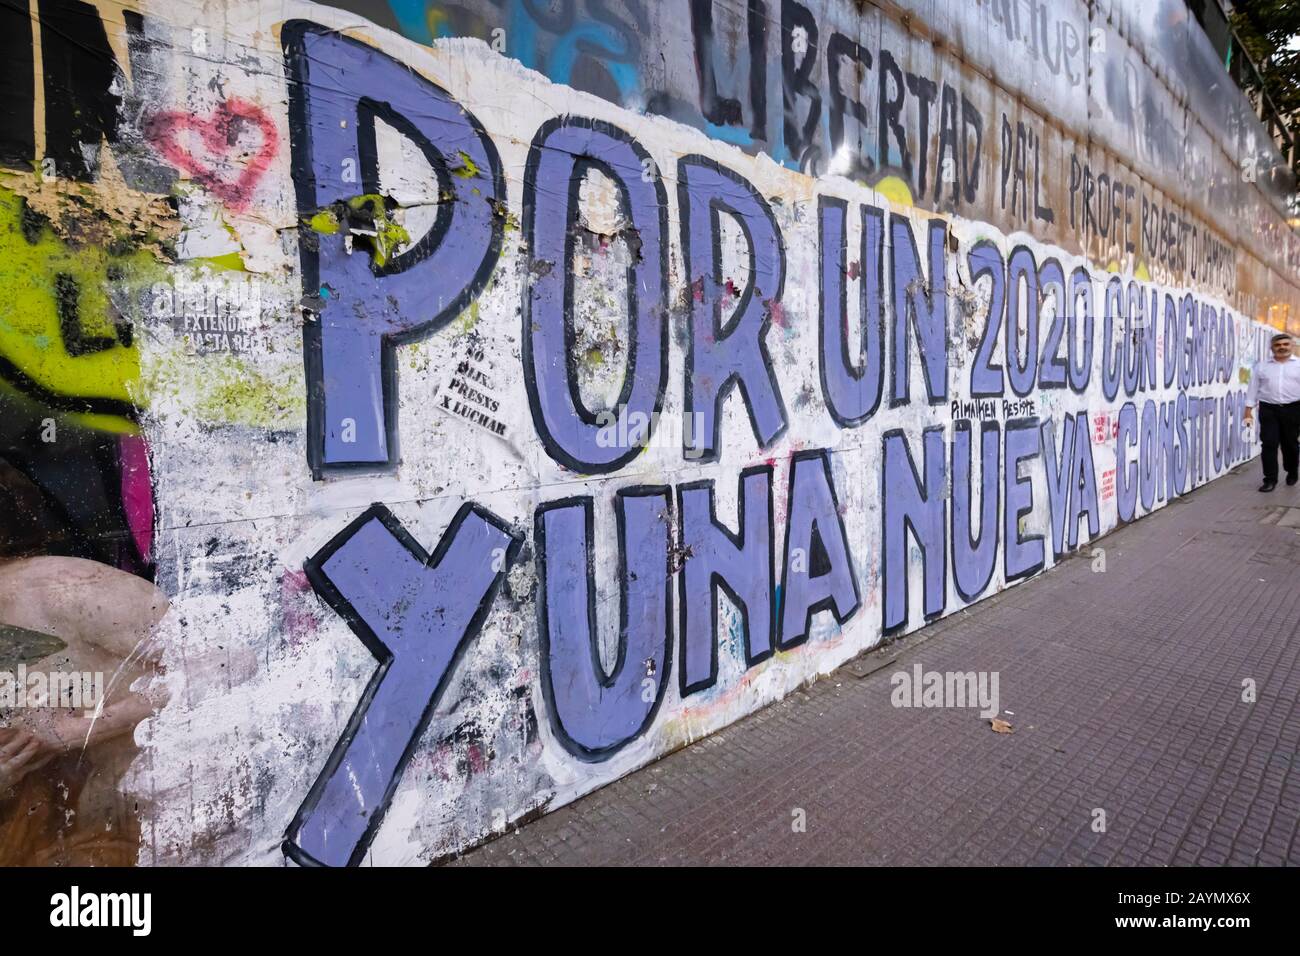 Graffiti on a wall from the political unrest and protests in Lastarria, Central Santiago, Metropolitan Region, capital city of Chile, South America Stock Photo